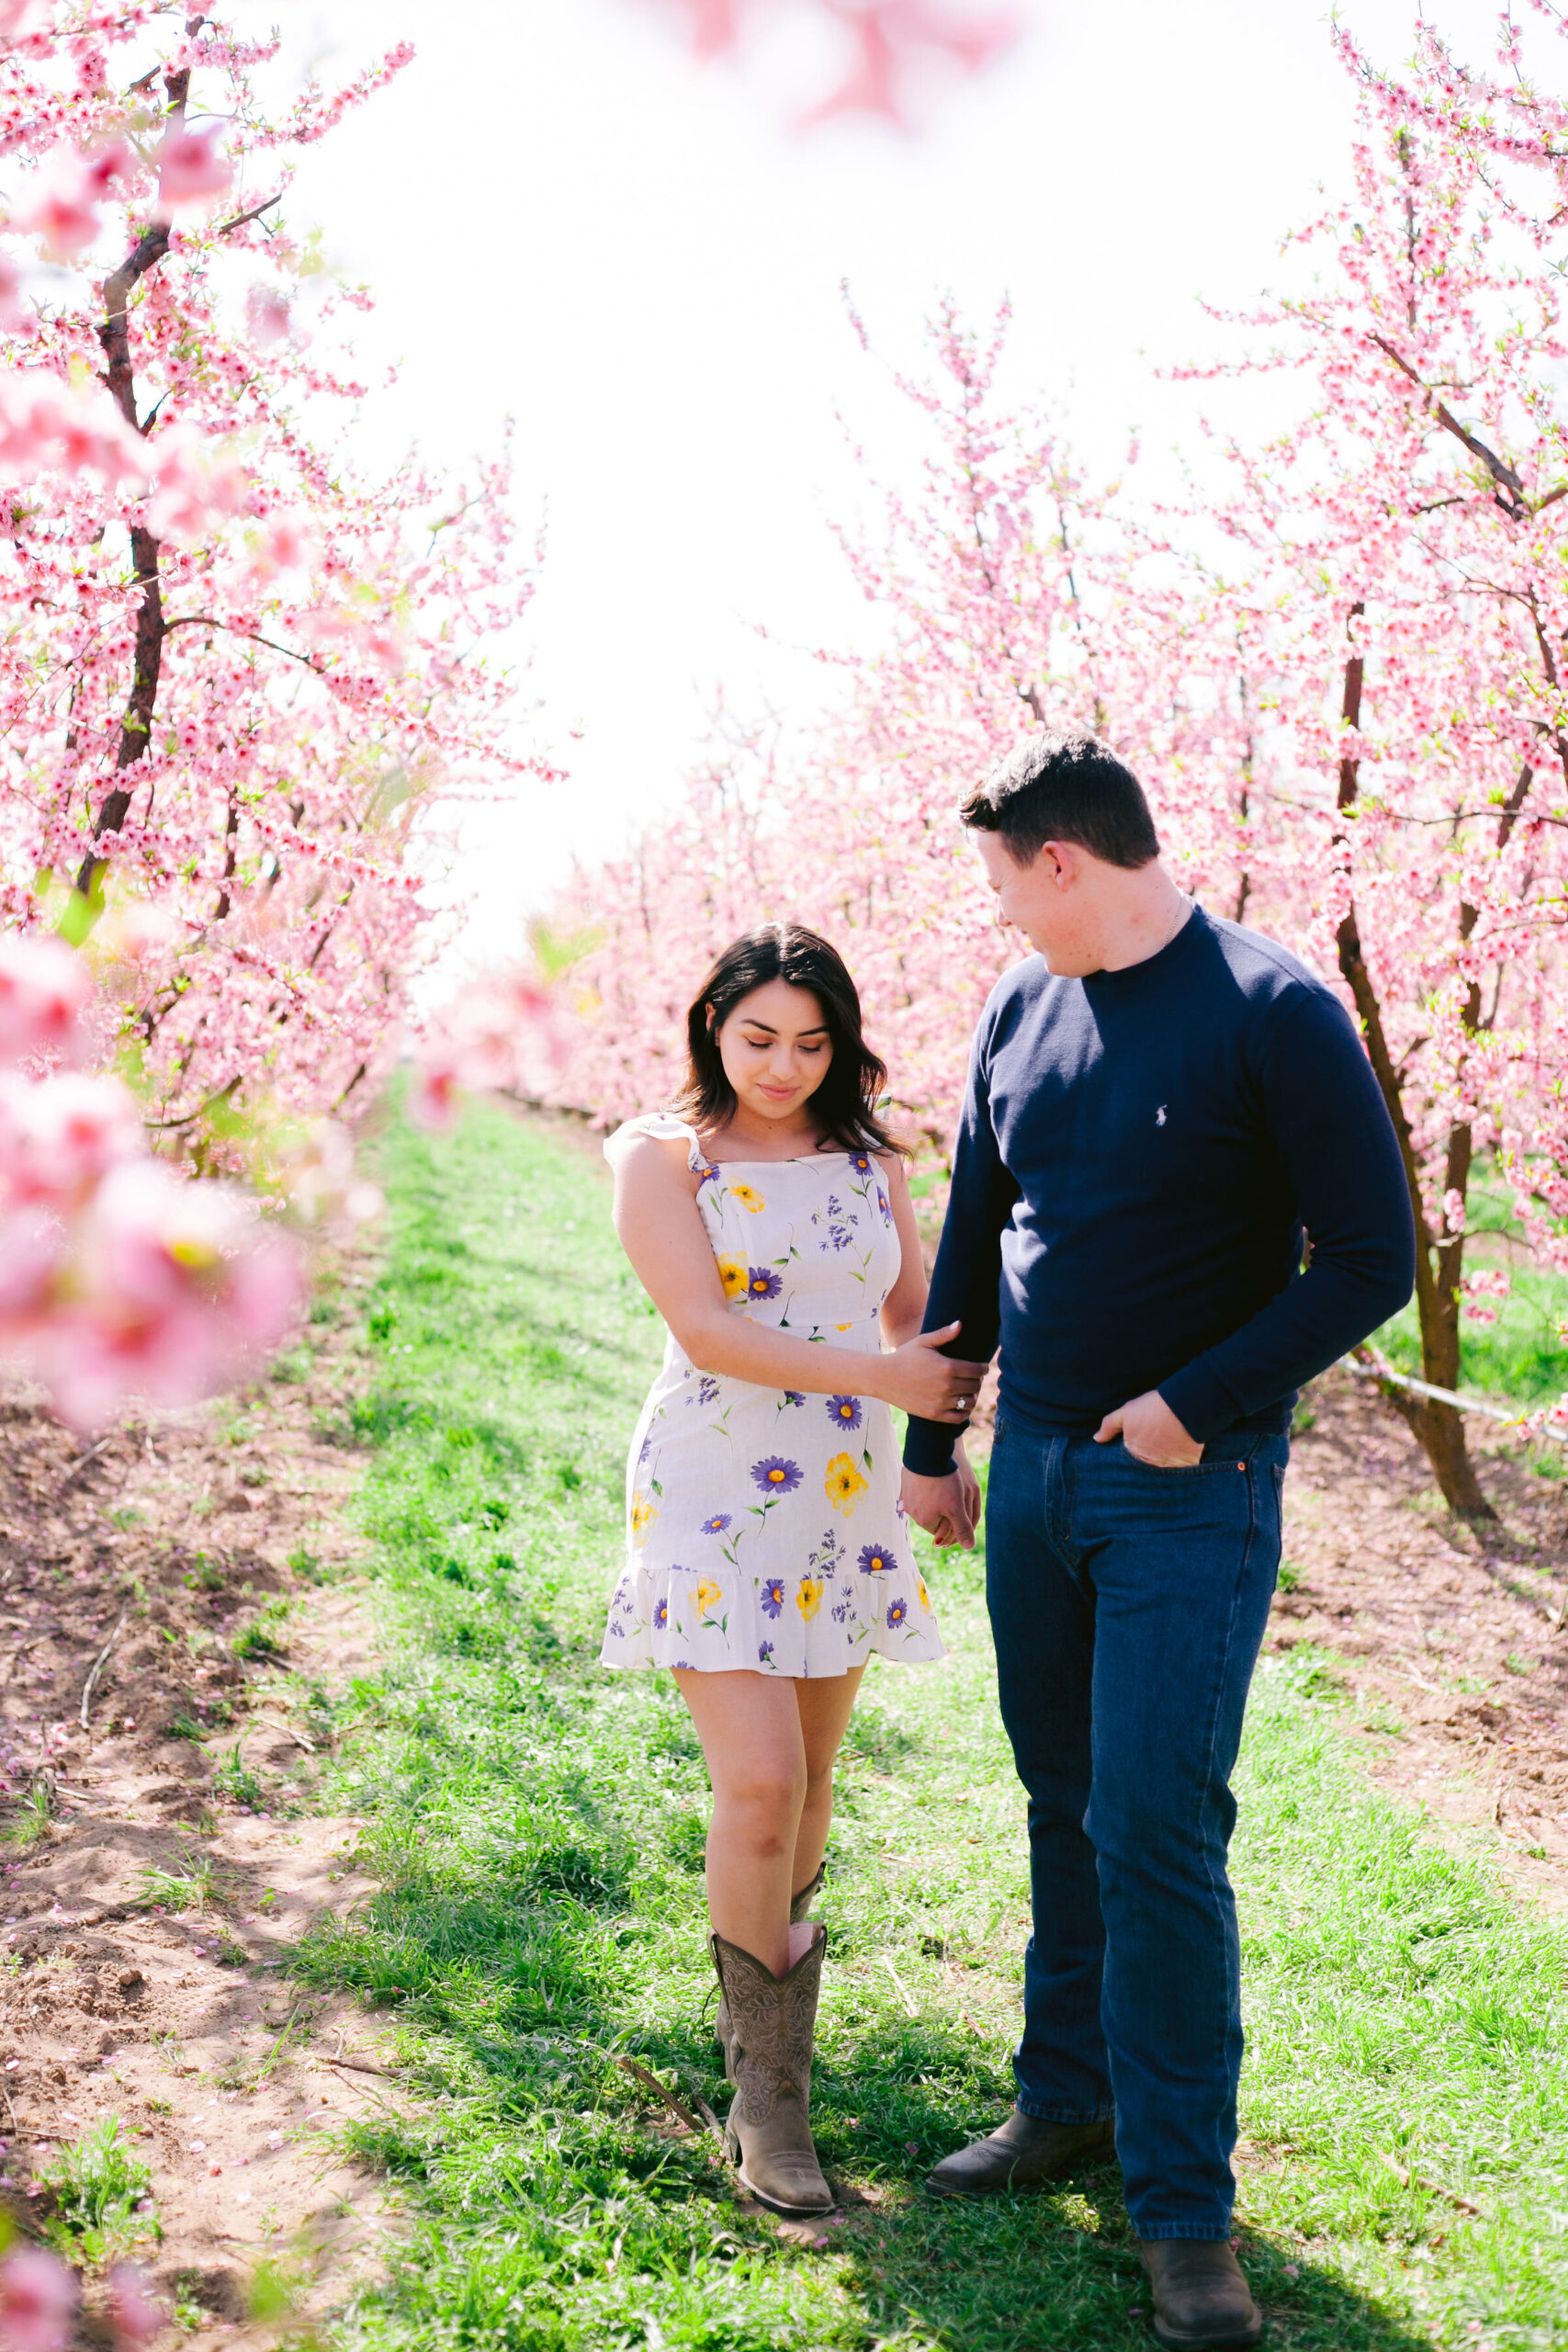 Man leading woman through pink orchards